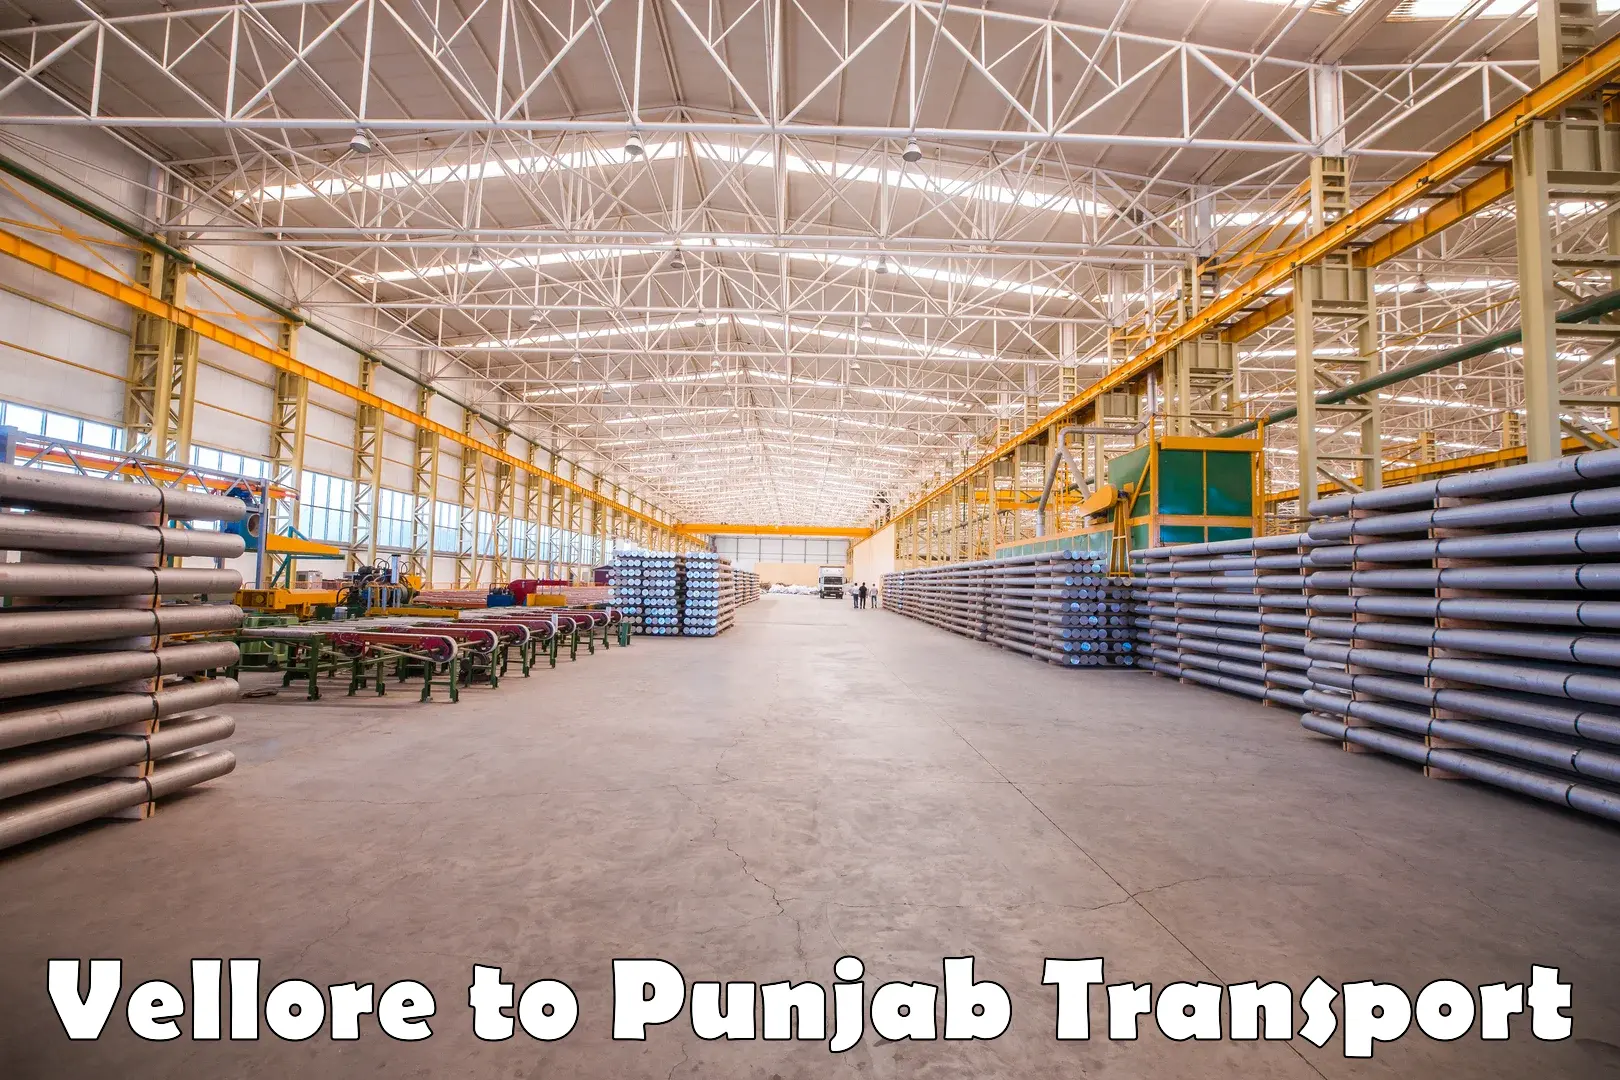 Transport shared services Vellore to Punjab